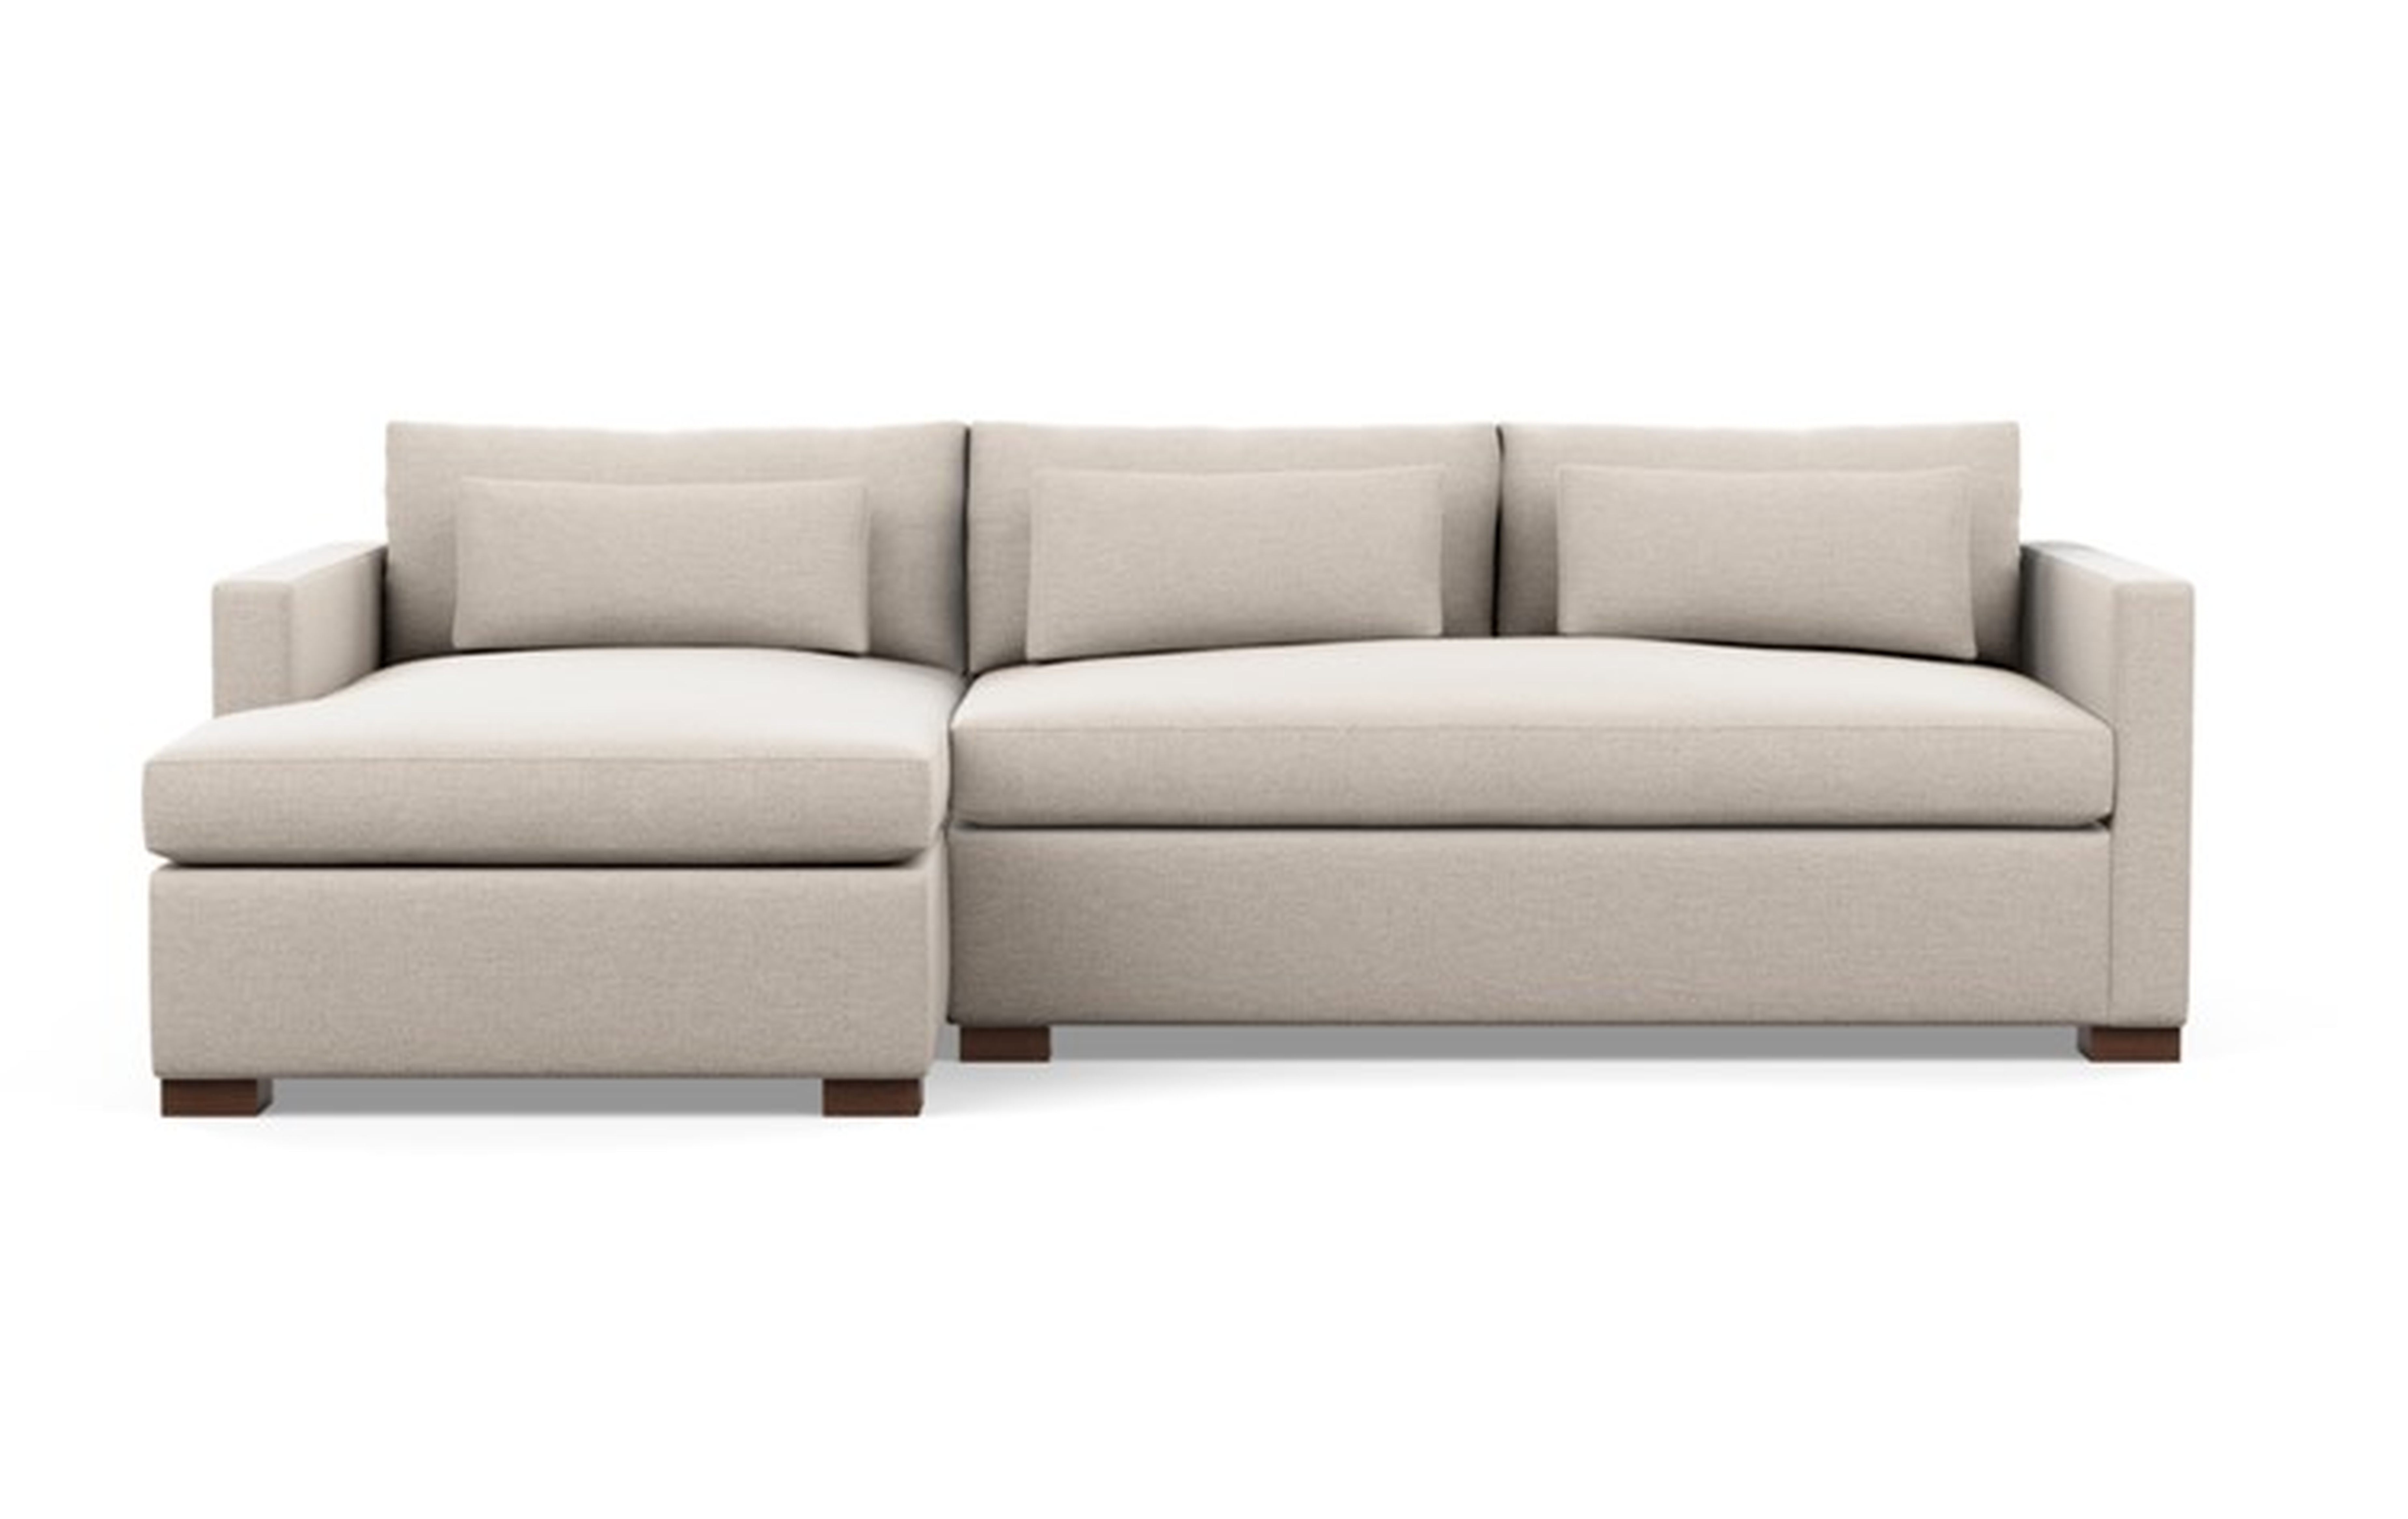 Charly Left Sectional with Beige Linen Fabric, extended chaise, and Oiled Walnut legs - Interior Define